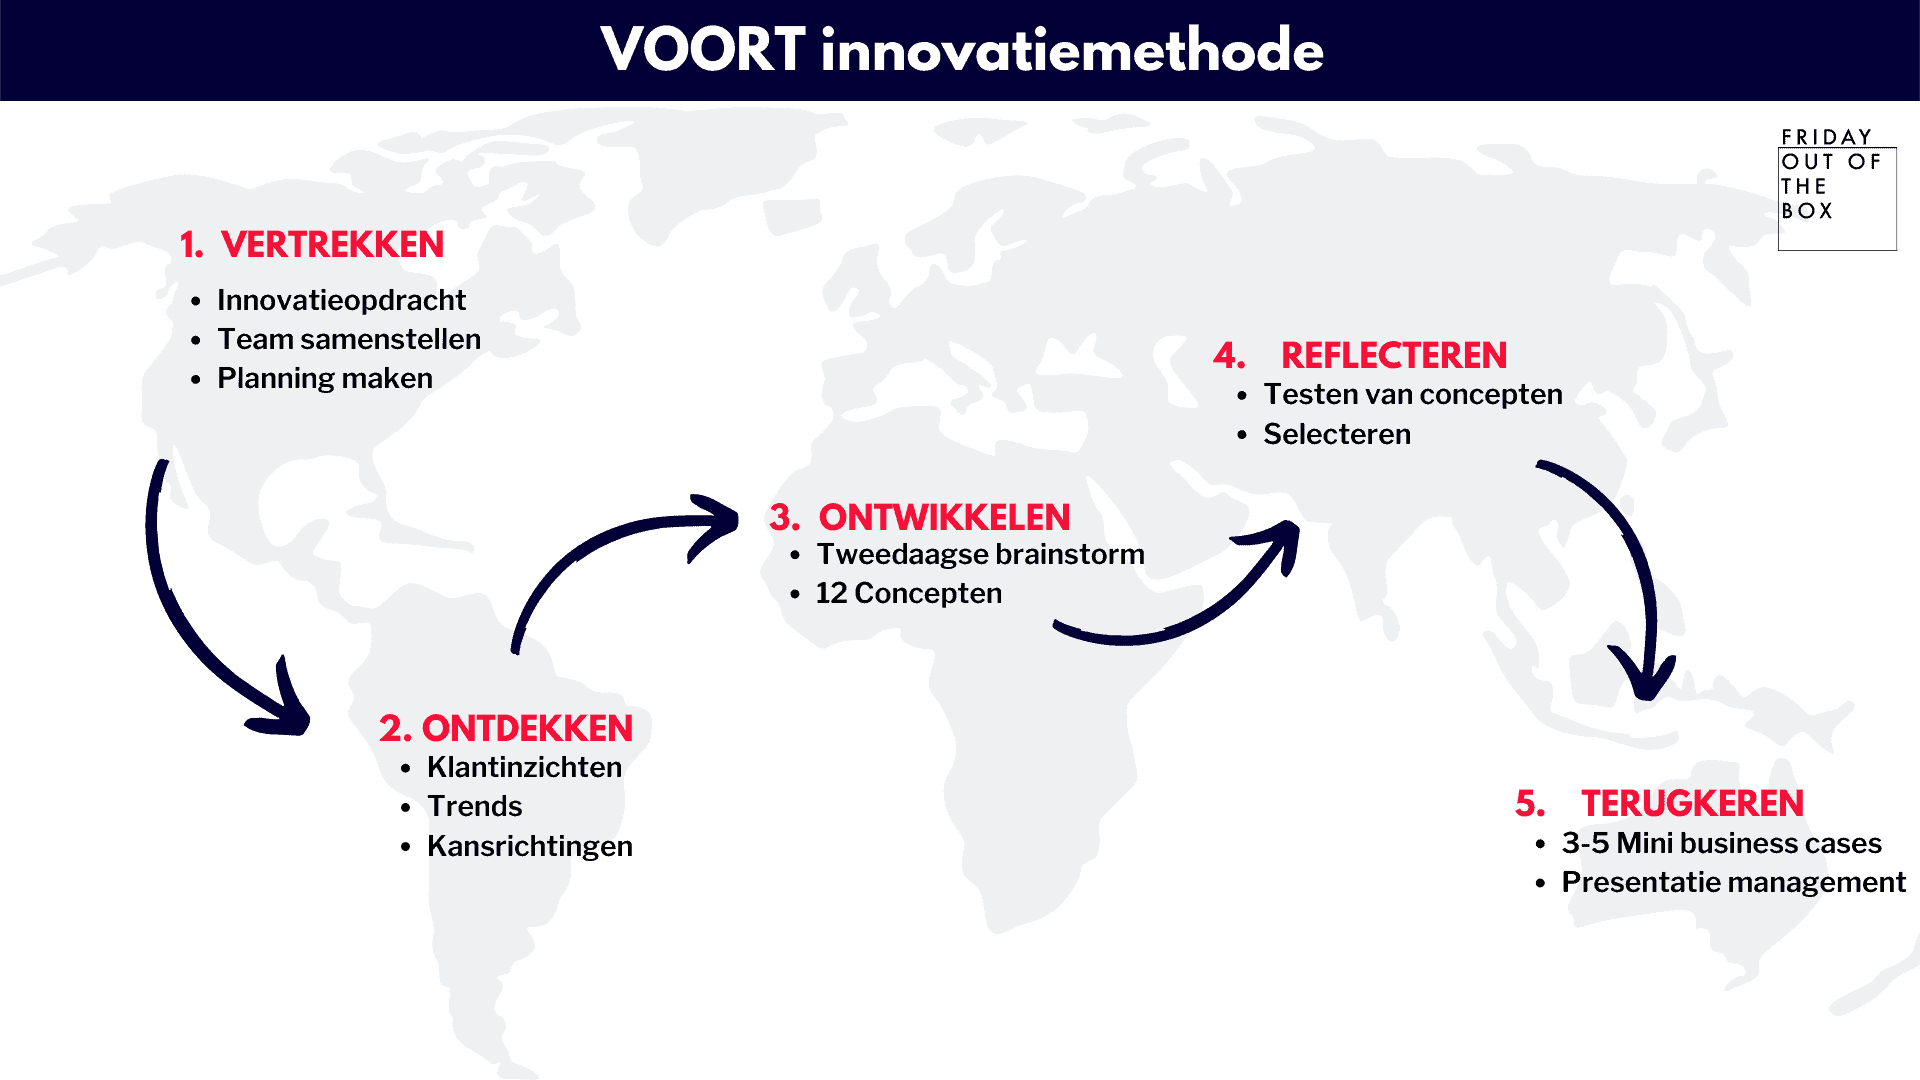 VOORT innovatiemethode Friday out of the Box